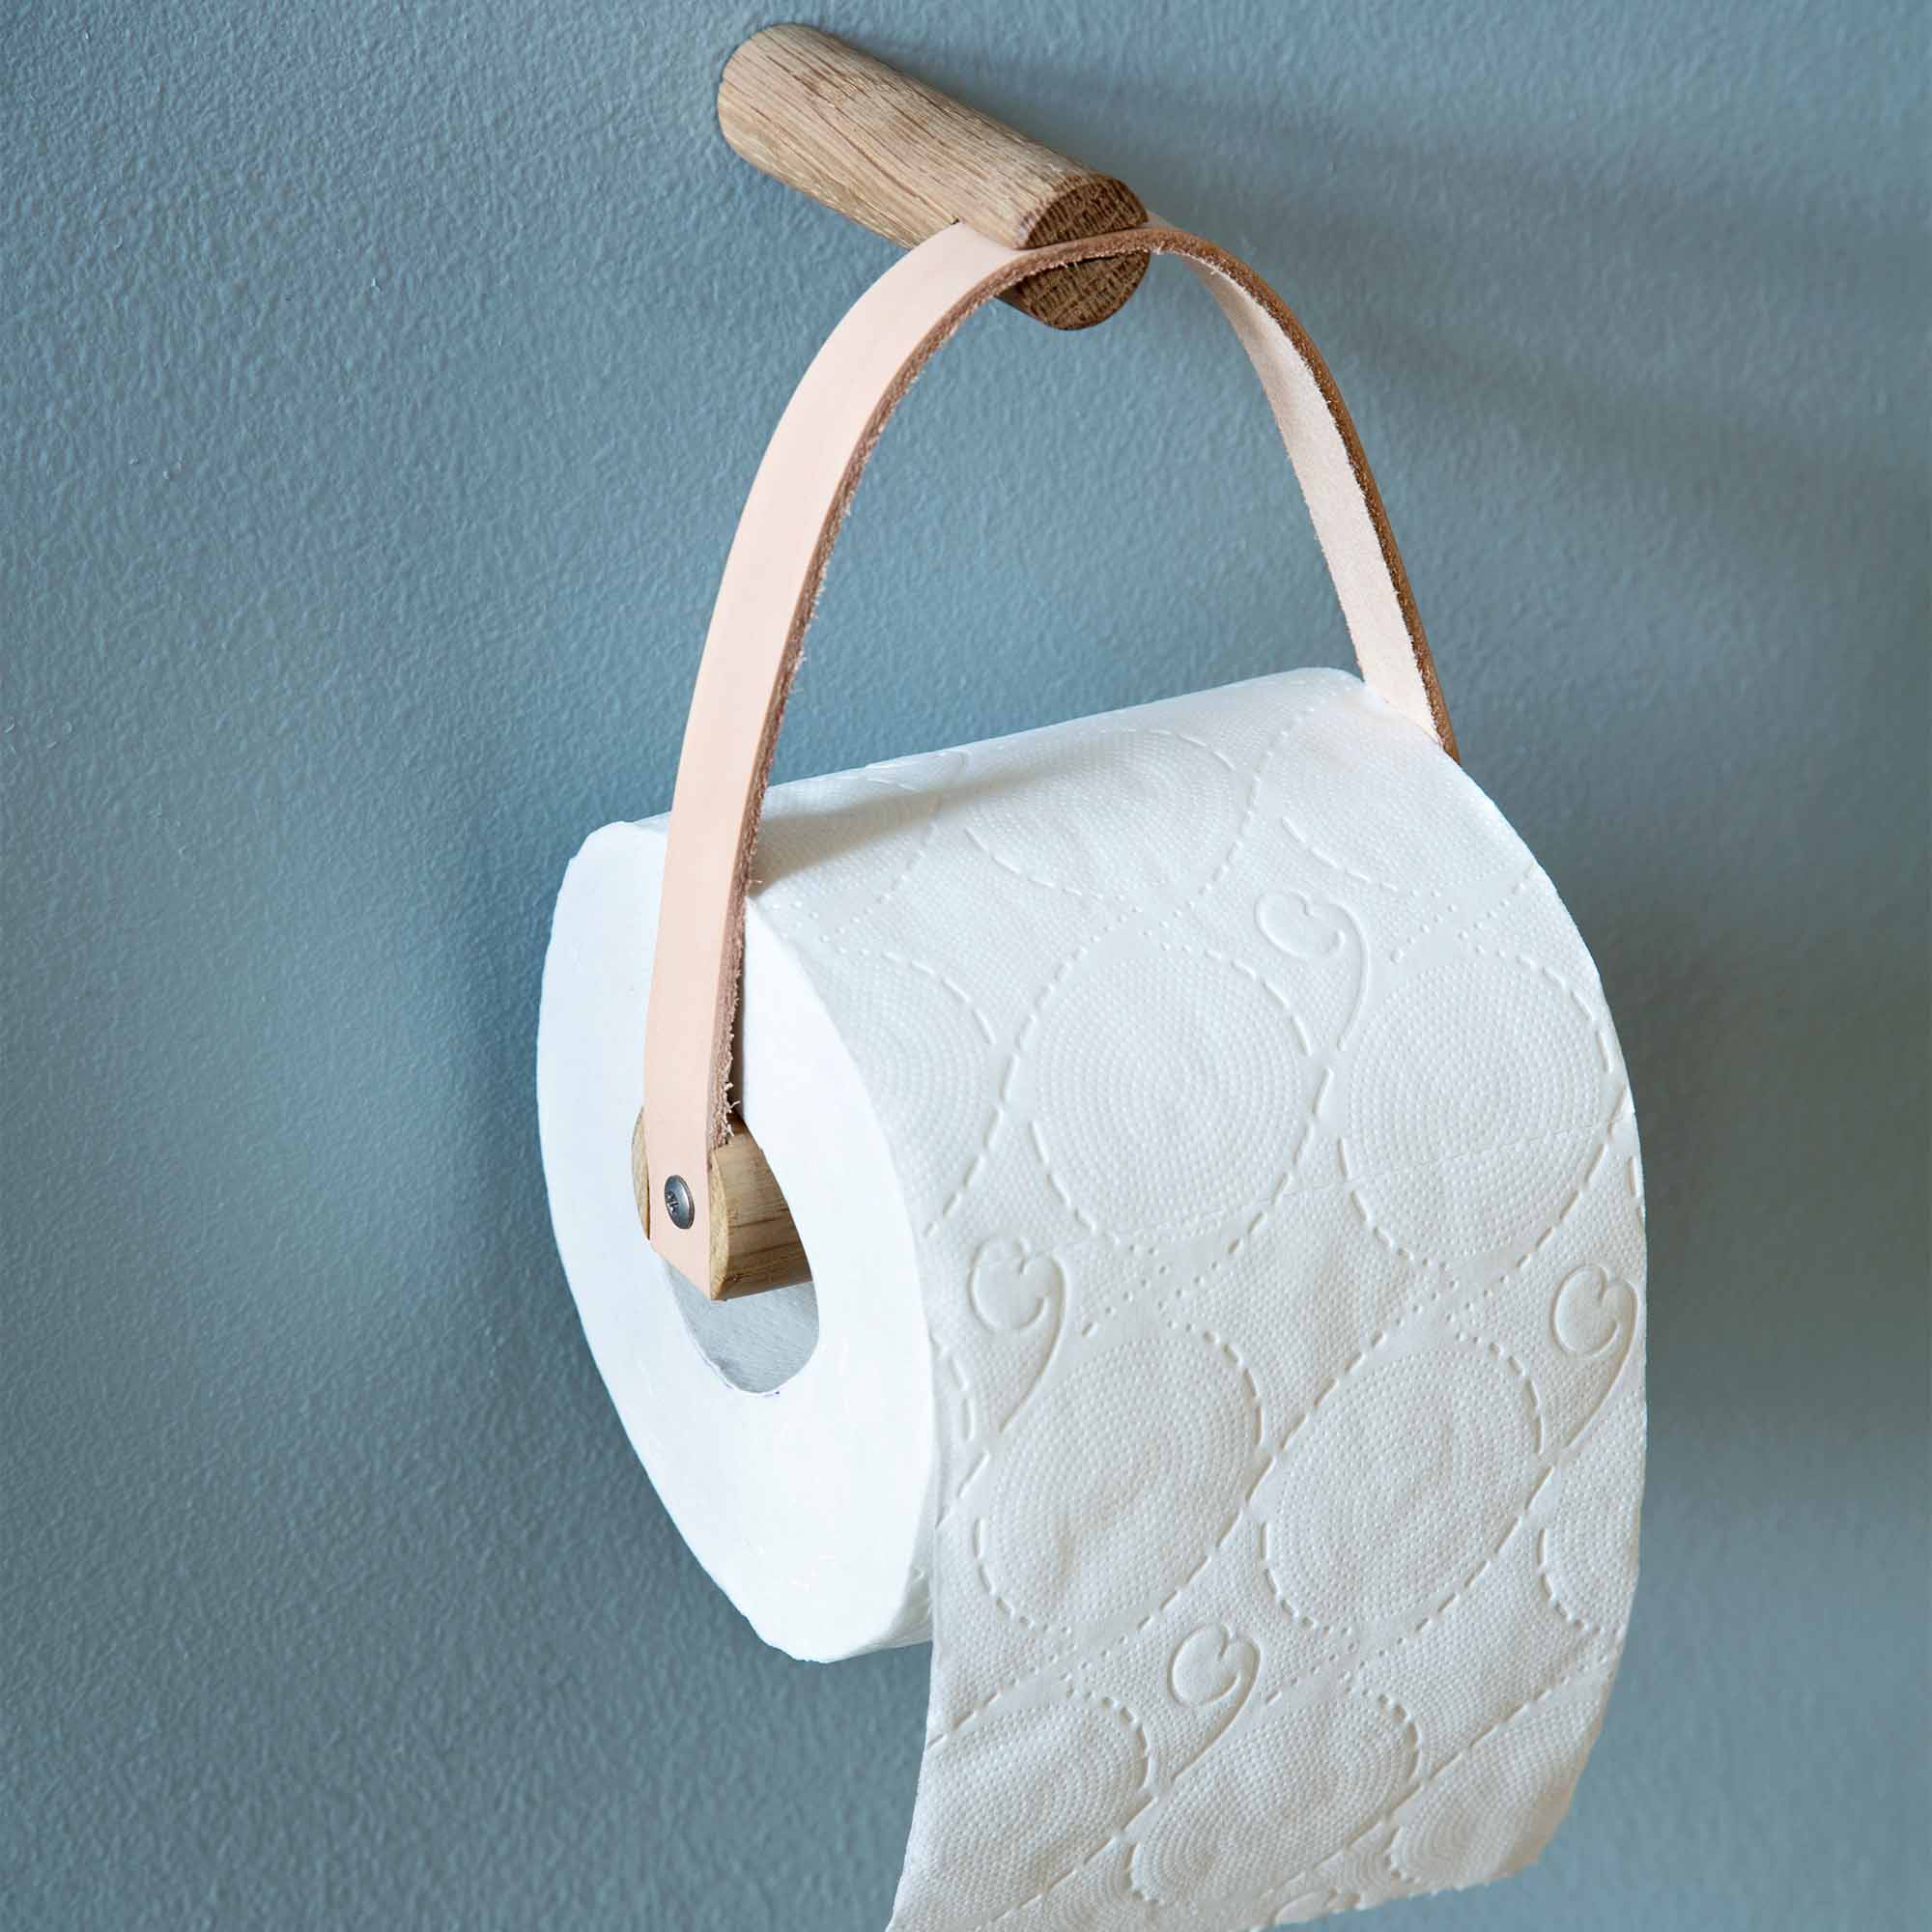 Support pour papier toilette * By wirth